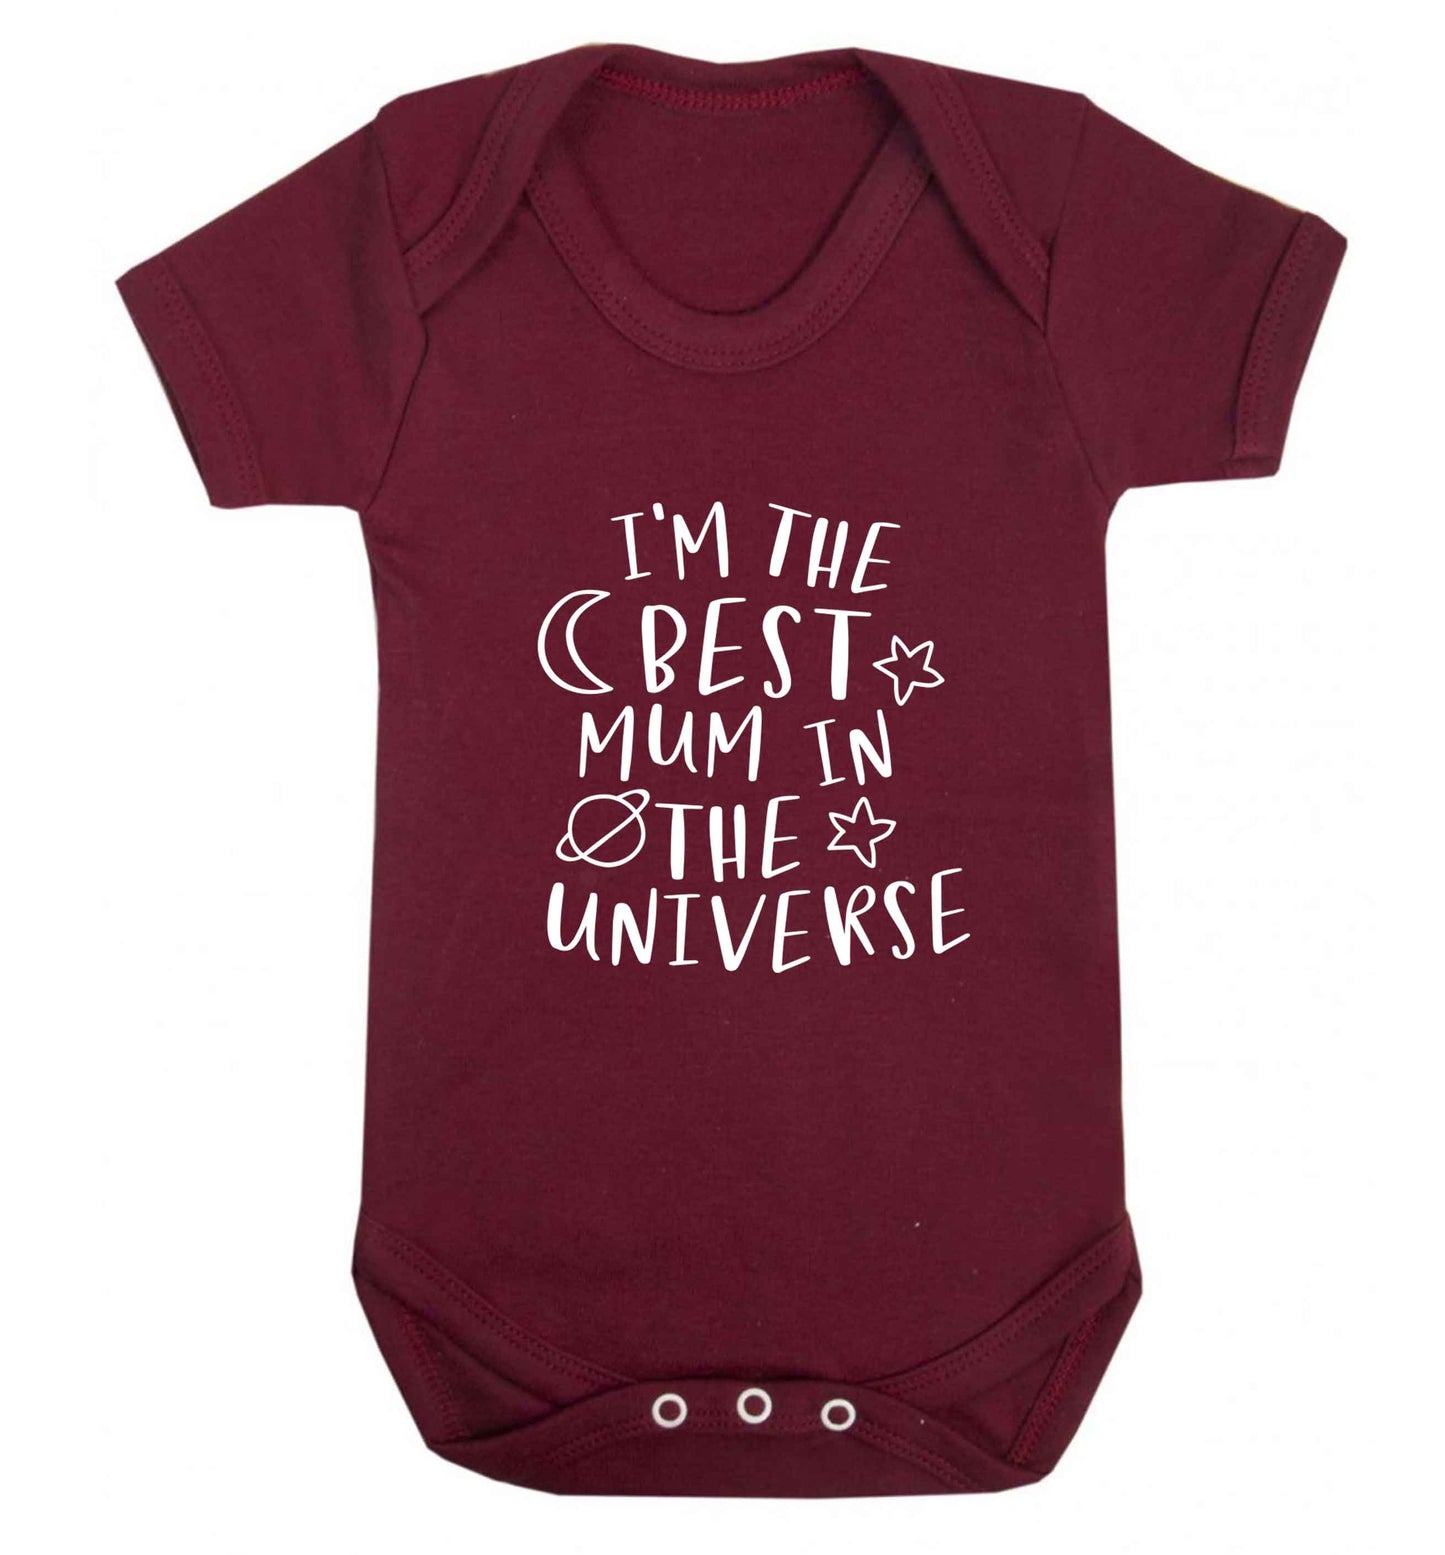 I'm the best mum in the universe baby vest maroon 18-24 months